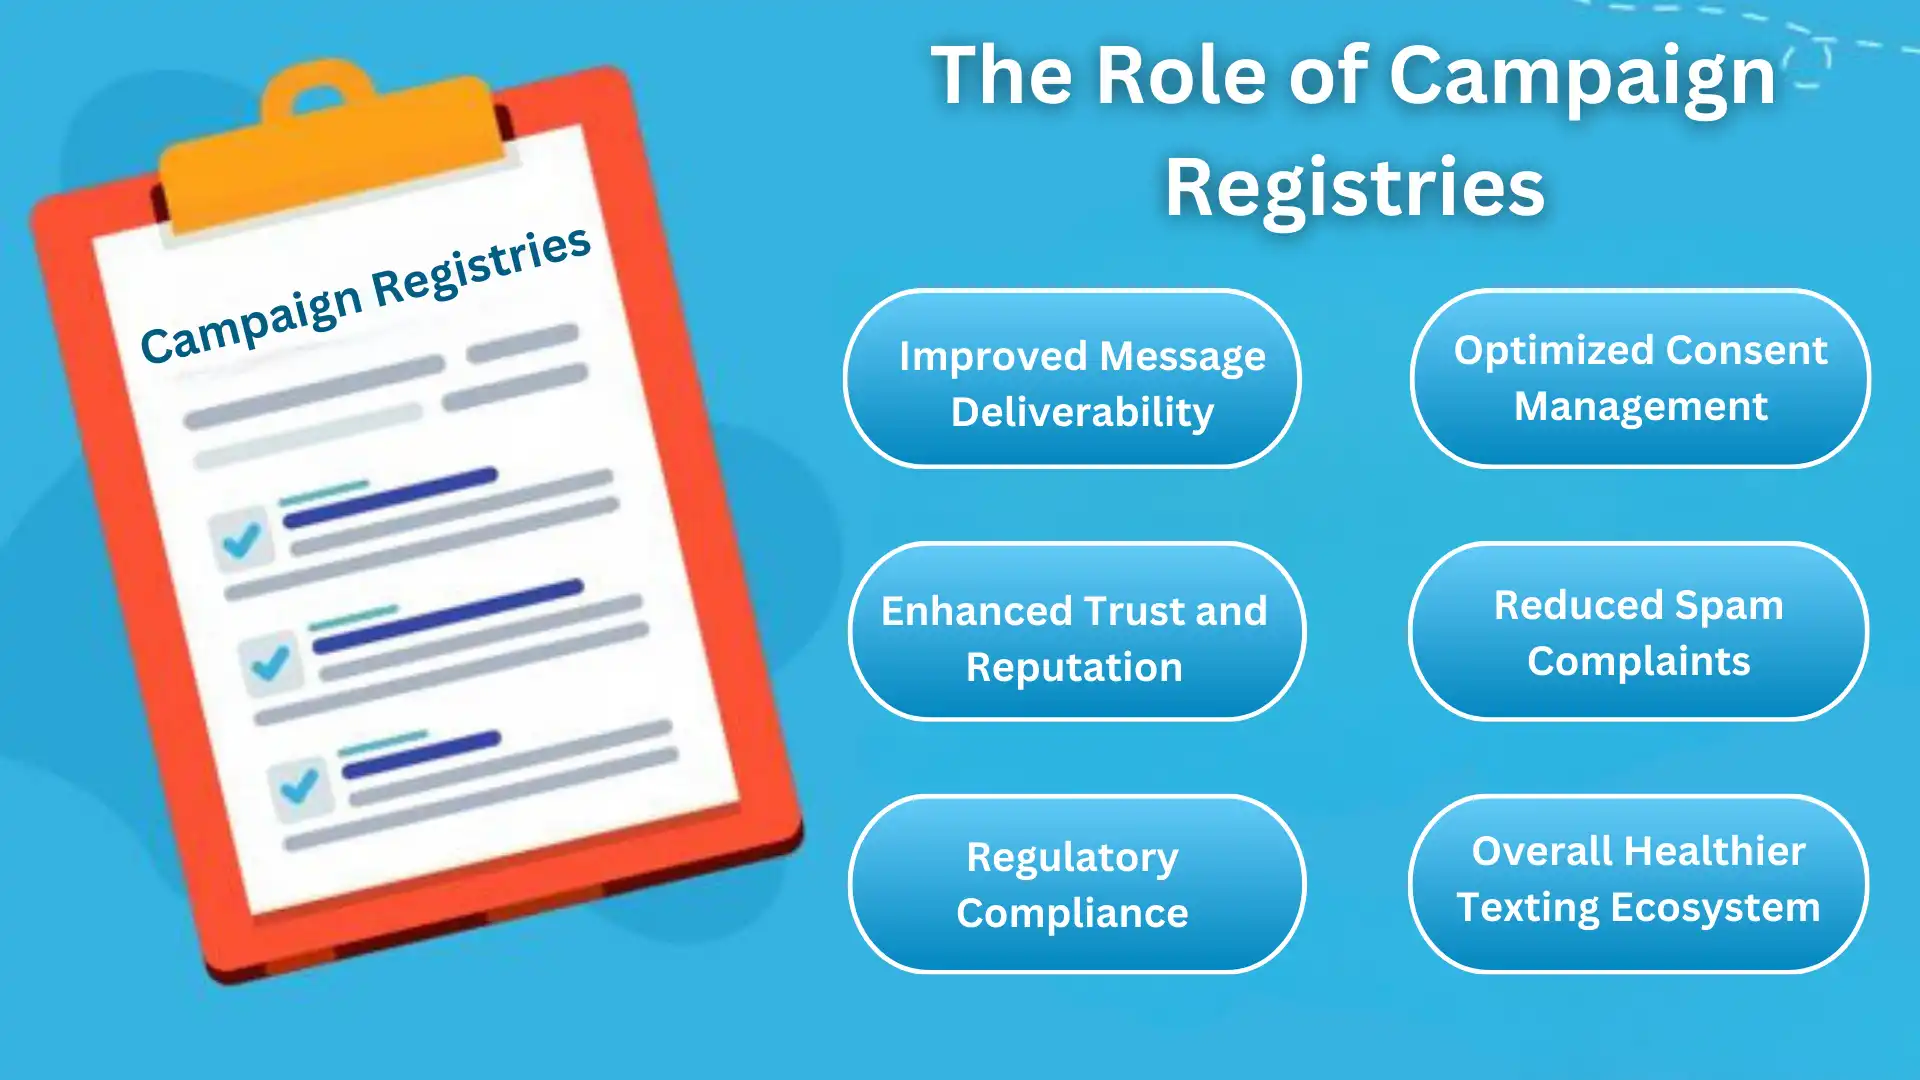 The Role of Campaign Registries